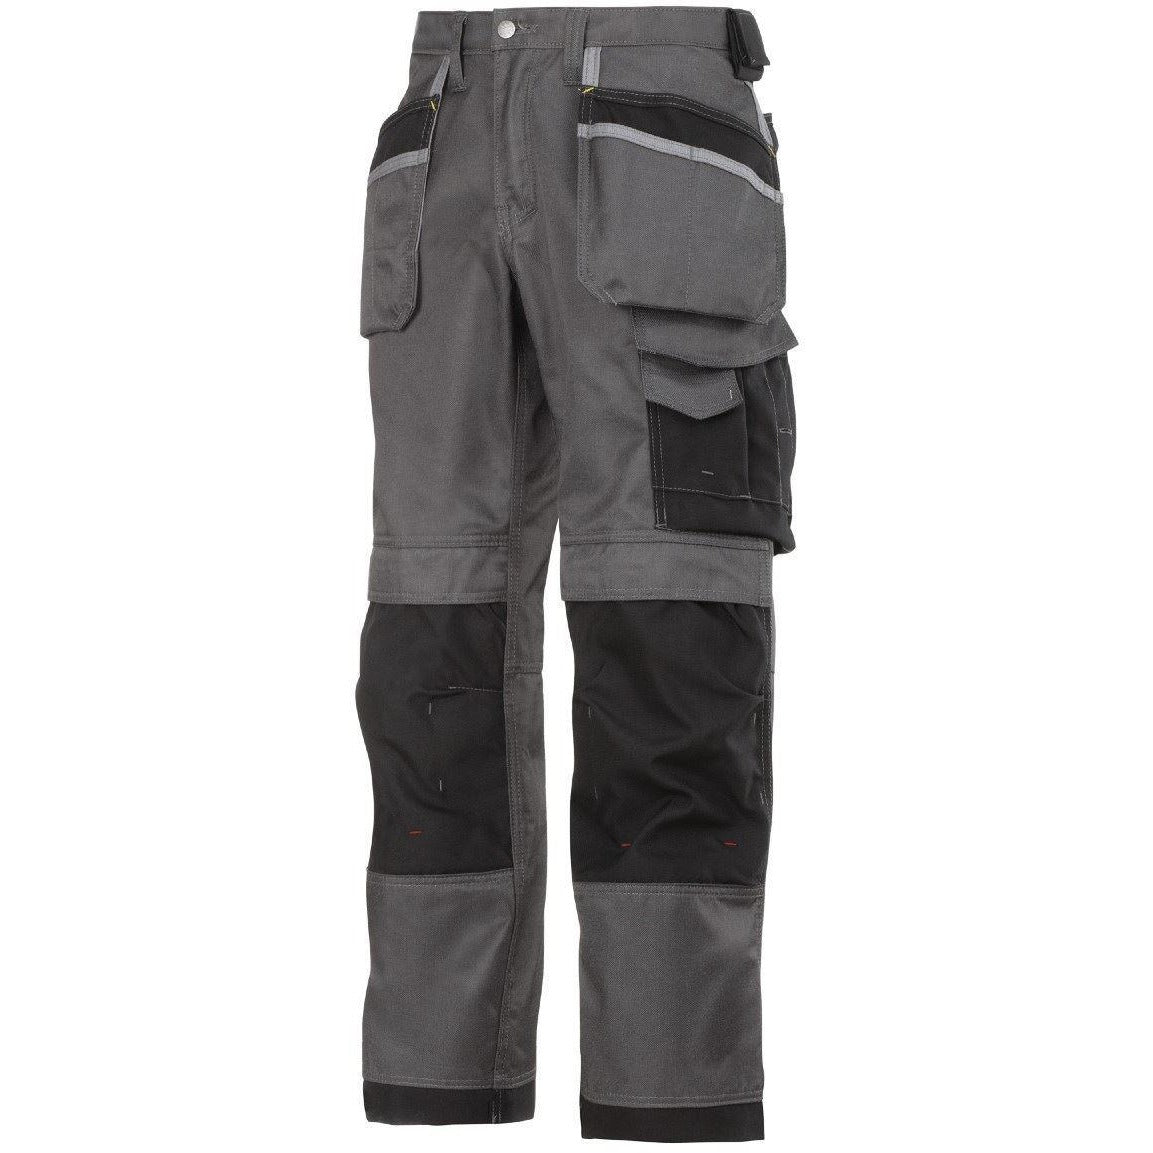 Snickers Workwear Craftsmen Holster Pocket Trousers DuraTwill